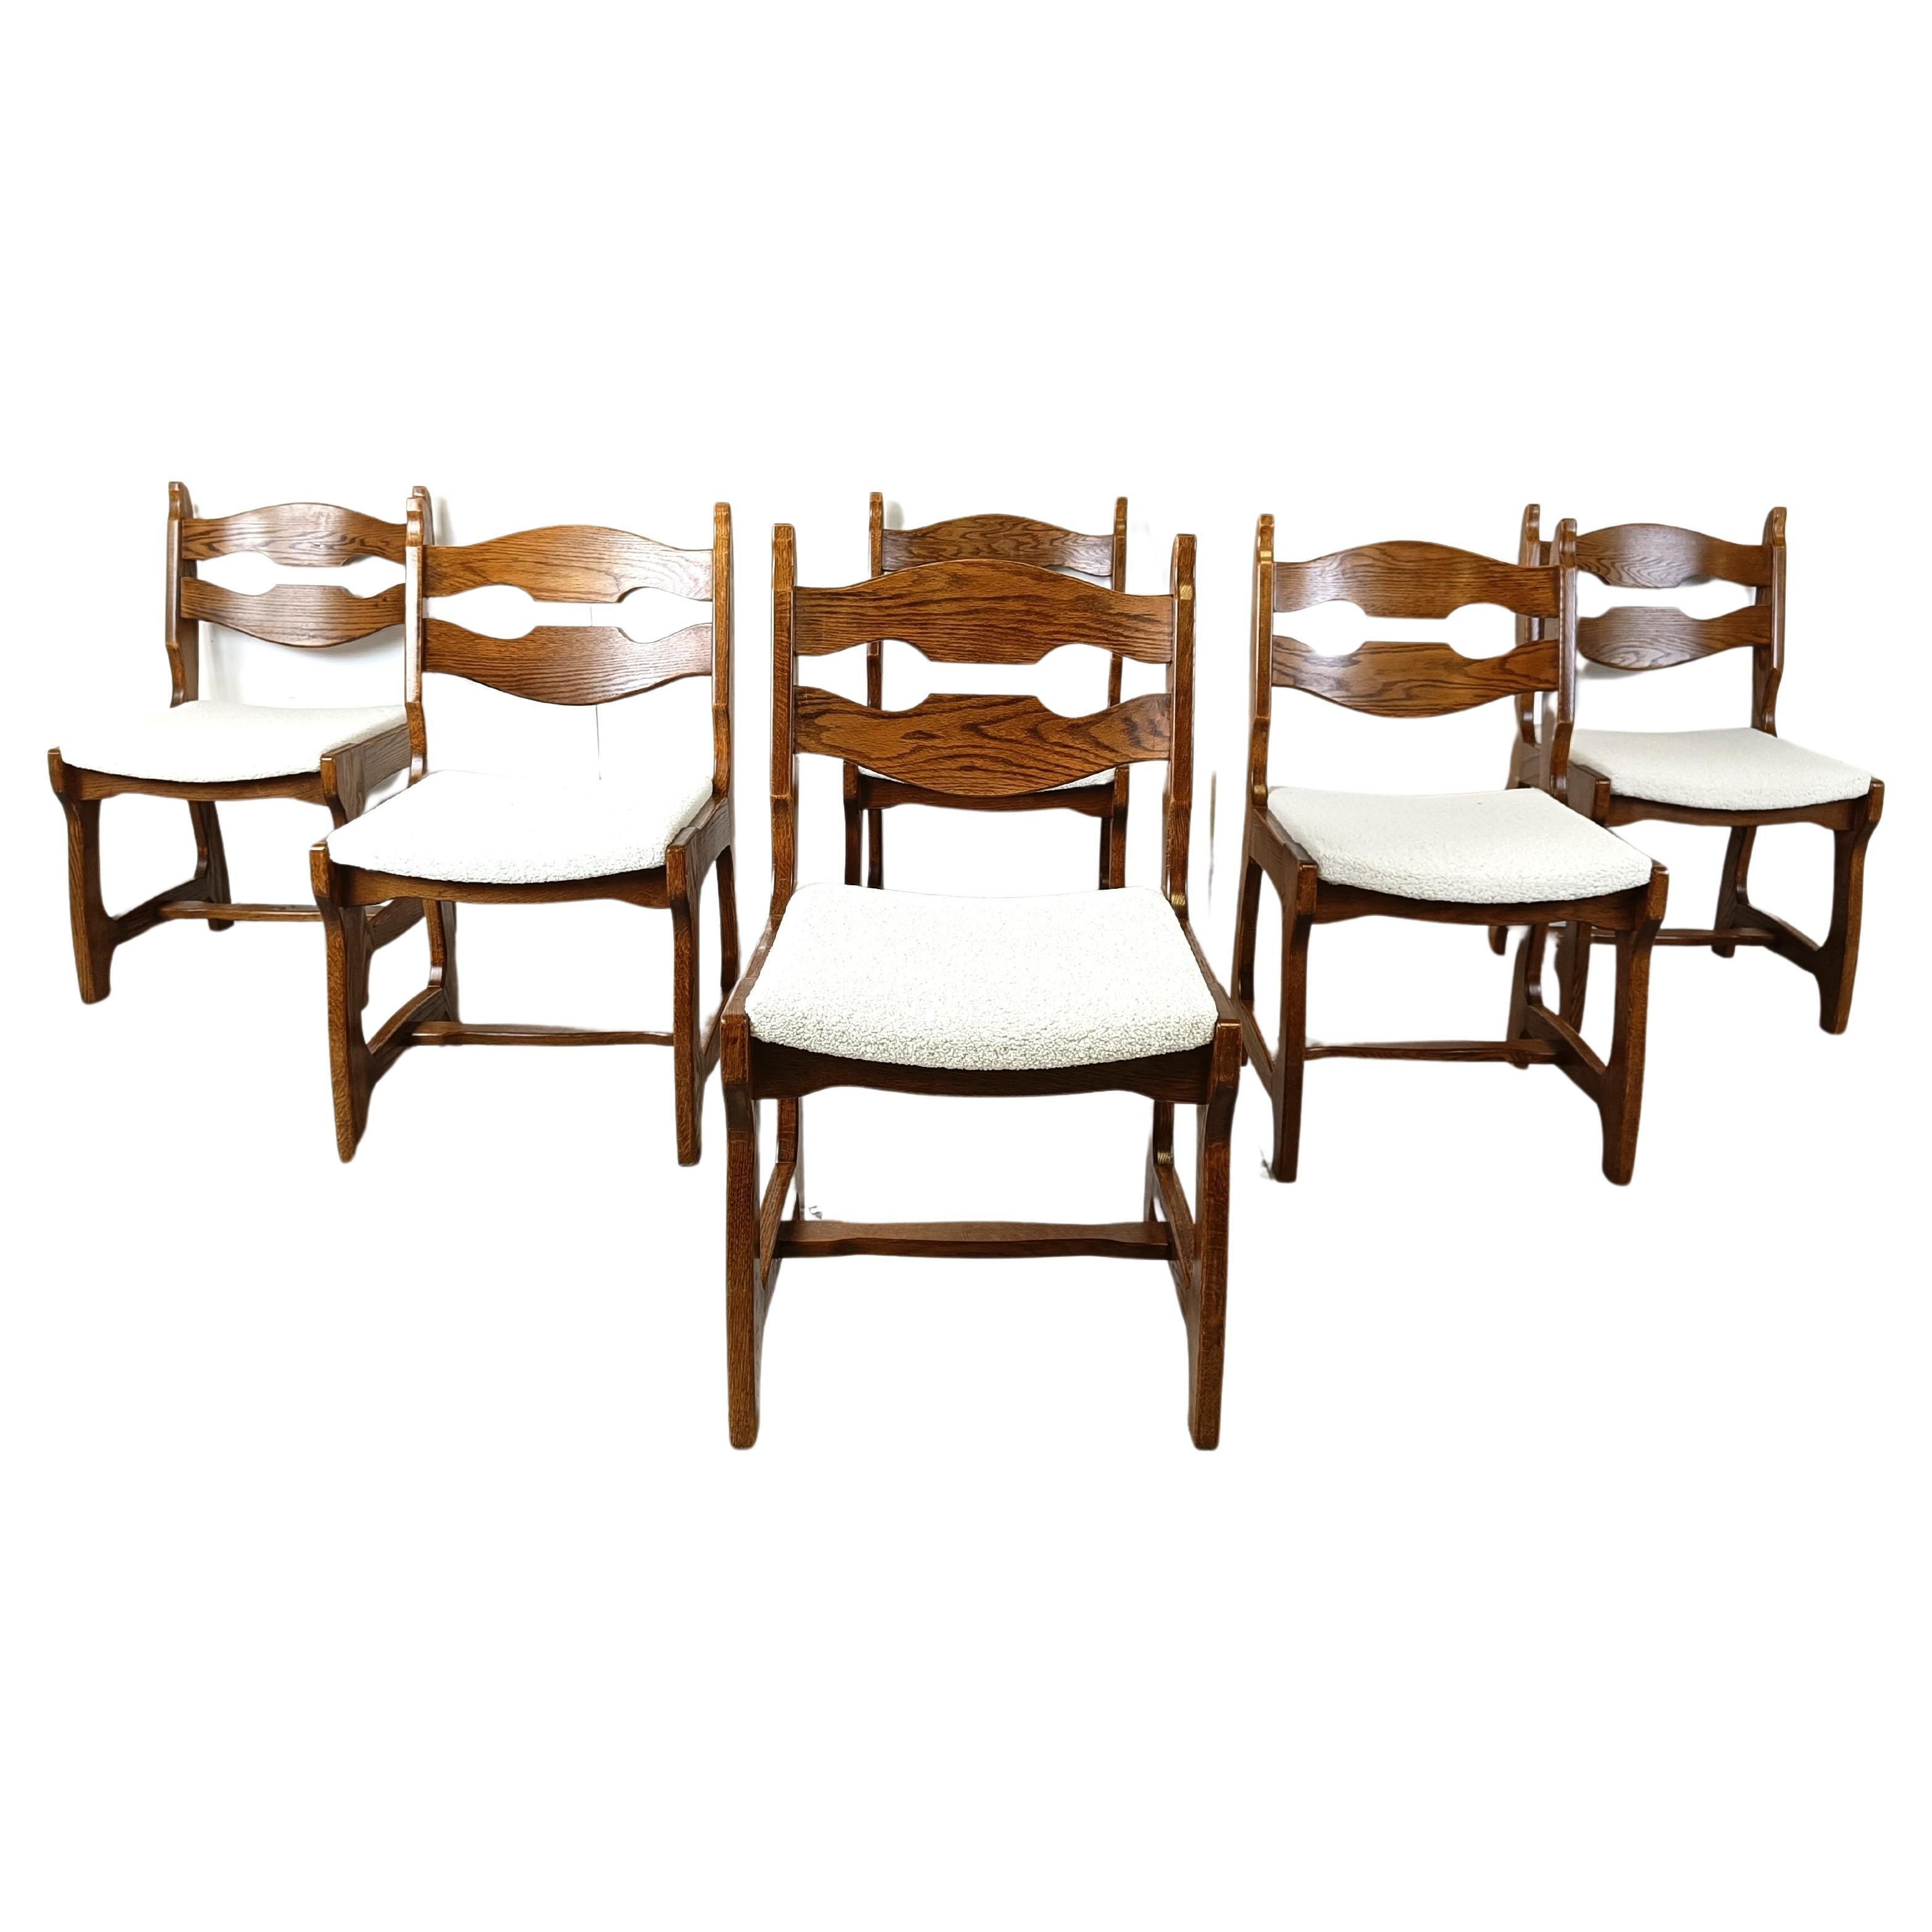 Vintage brutalist dining chairs, set of 6 - 1960s 